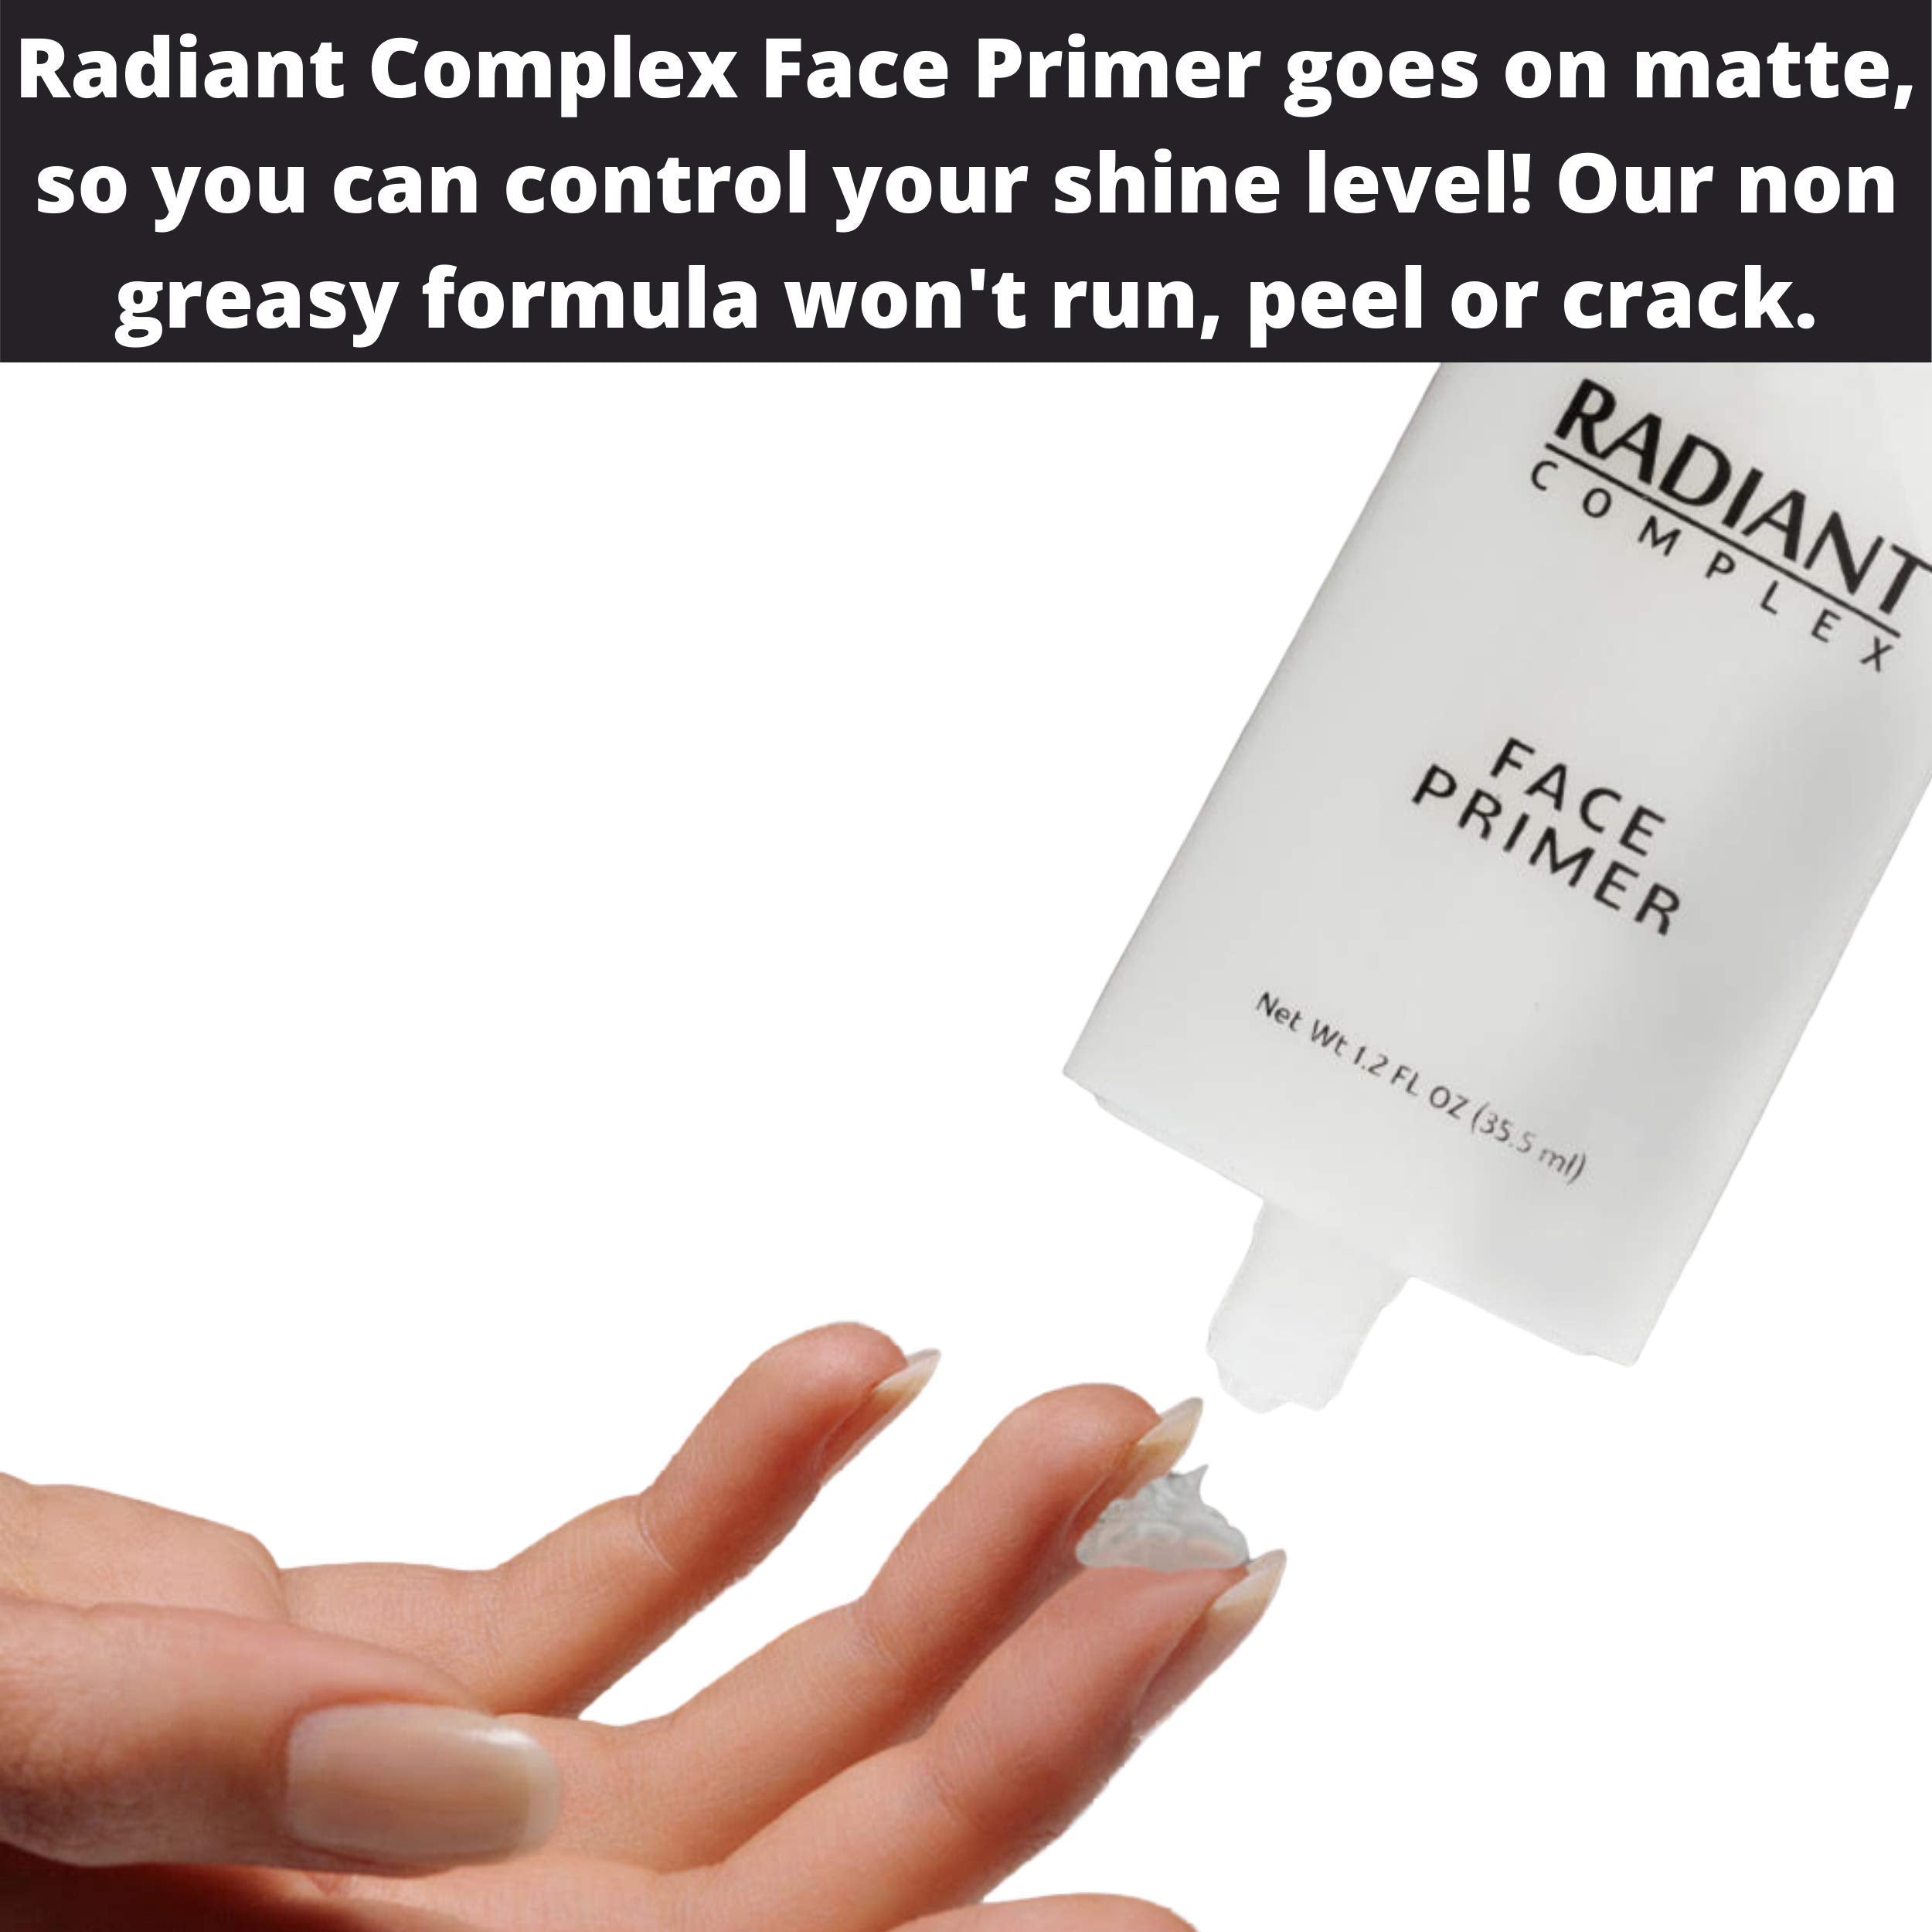 Best Makeup Base: Radiant Complex Face Primer and Pore Minimizer Transforms Your Skin into a Smooth Matte Canvas for Applying Foundation and Make Up, Hiding Fine Lines, Blemishes and Wrinkles 1.2 OZ